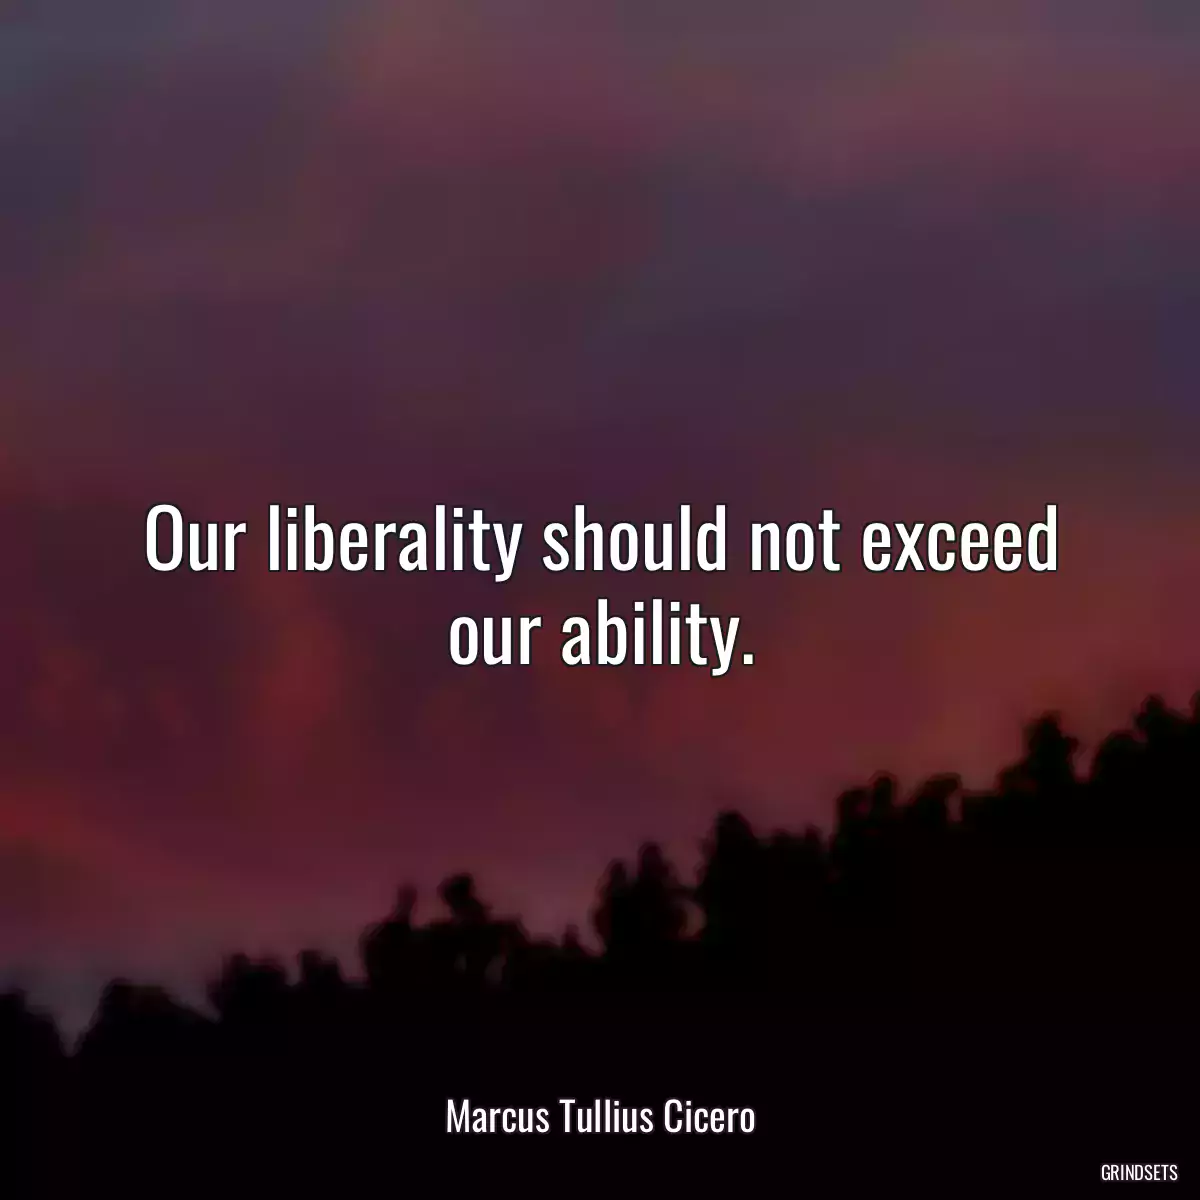 Our liberality should not exceed our ability.